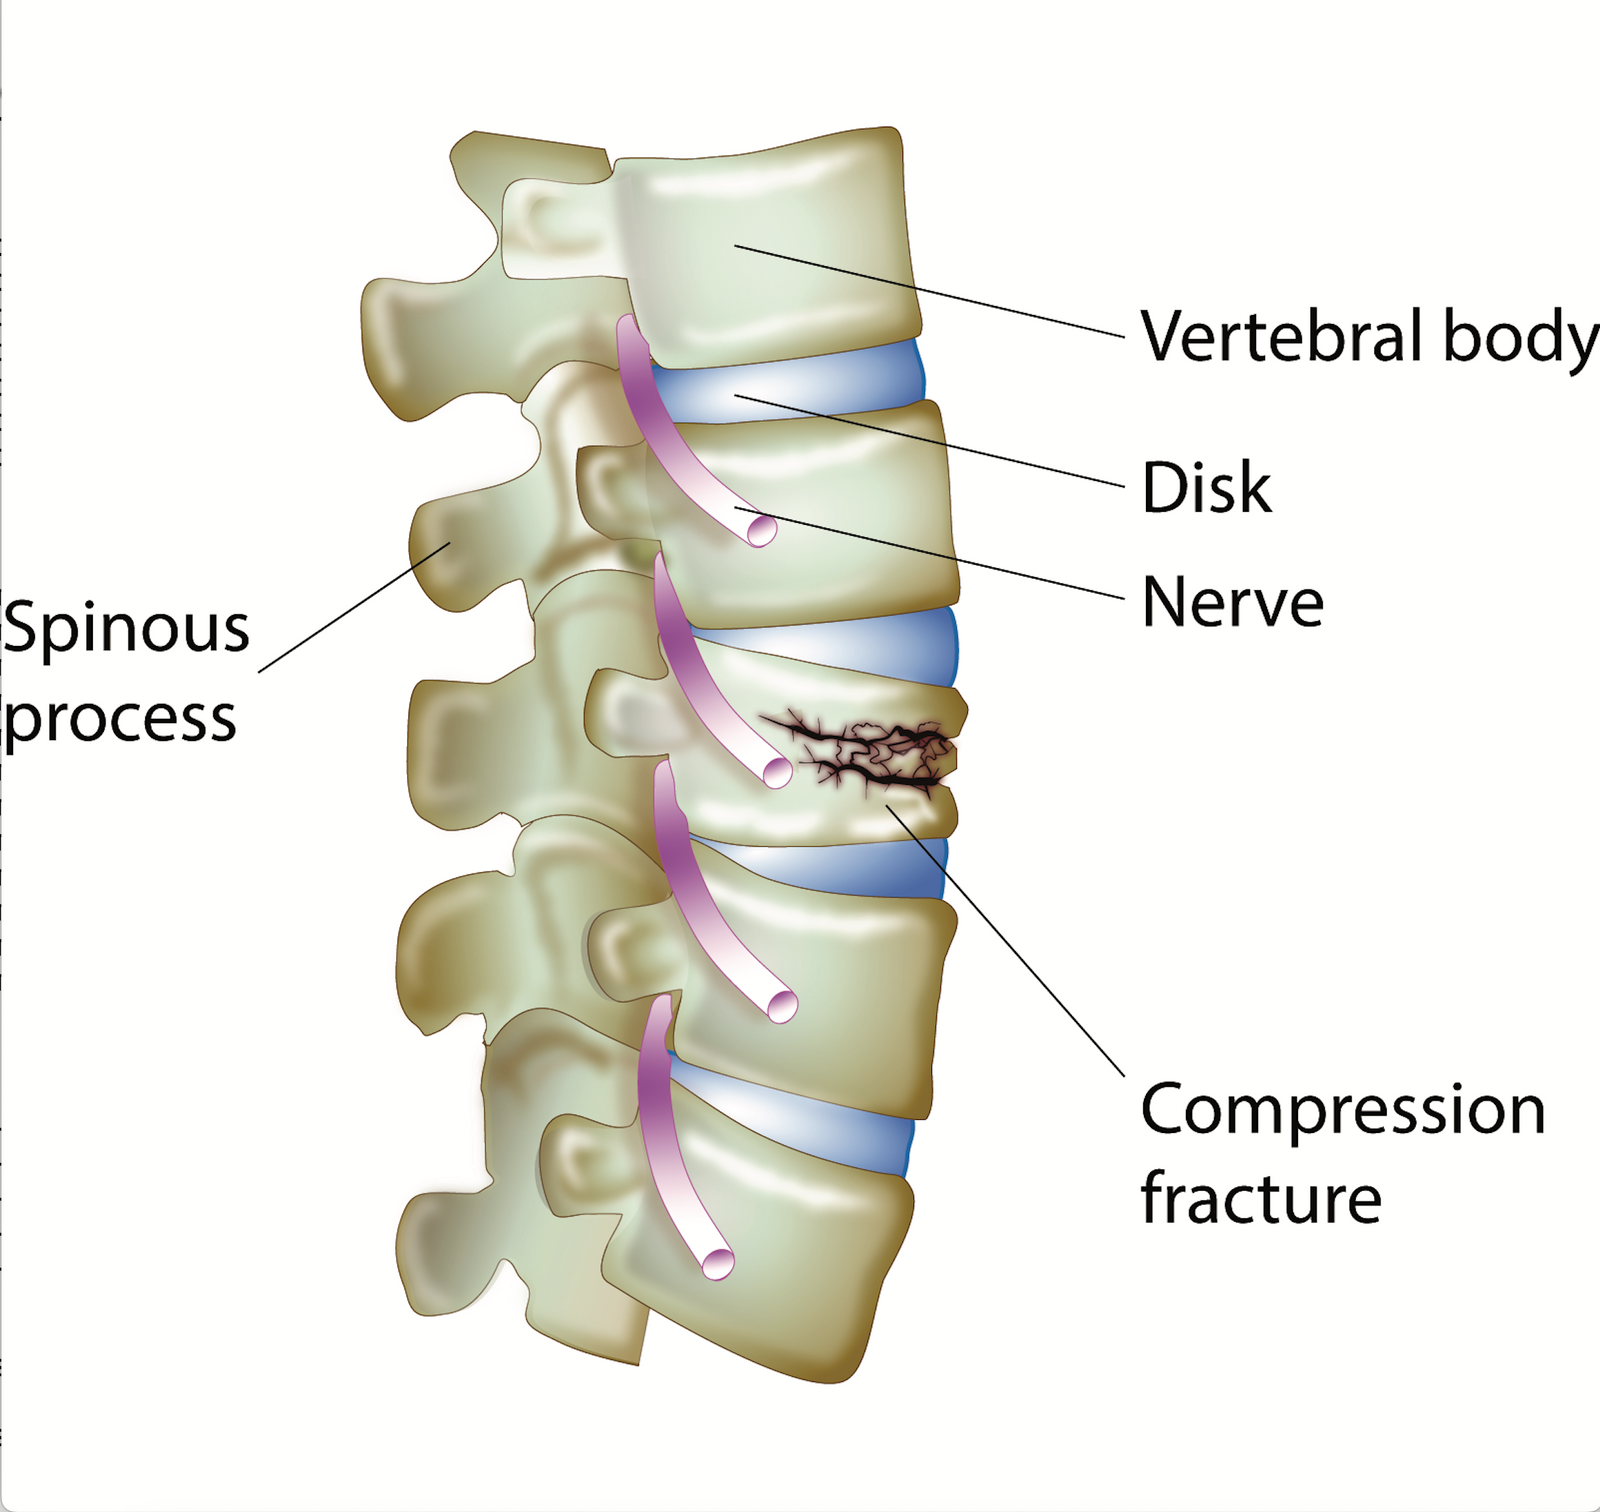 What Is a Compression Fracture of the Spine?